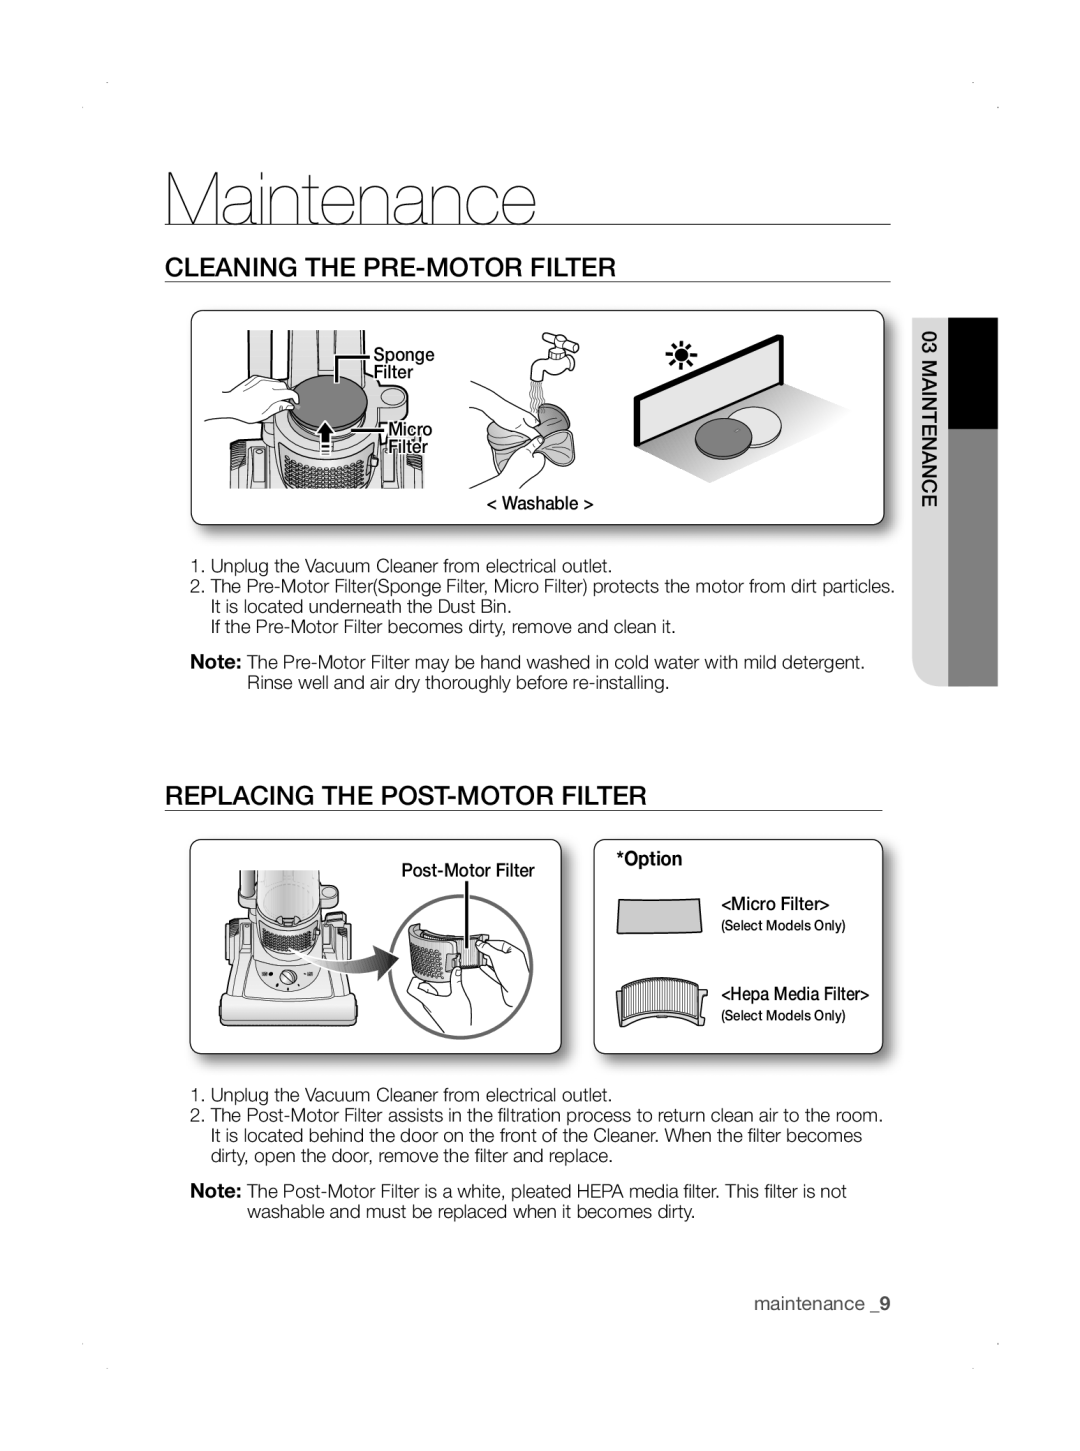 Samsung SU33 Series user manual cleanINg the Pre-Motor Filter, ReplAciNg THE POST-MOTOR FILTER, maintenance, Maintenance 